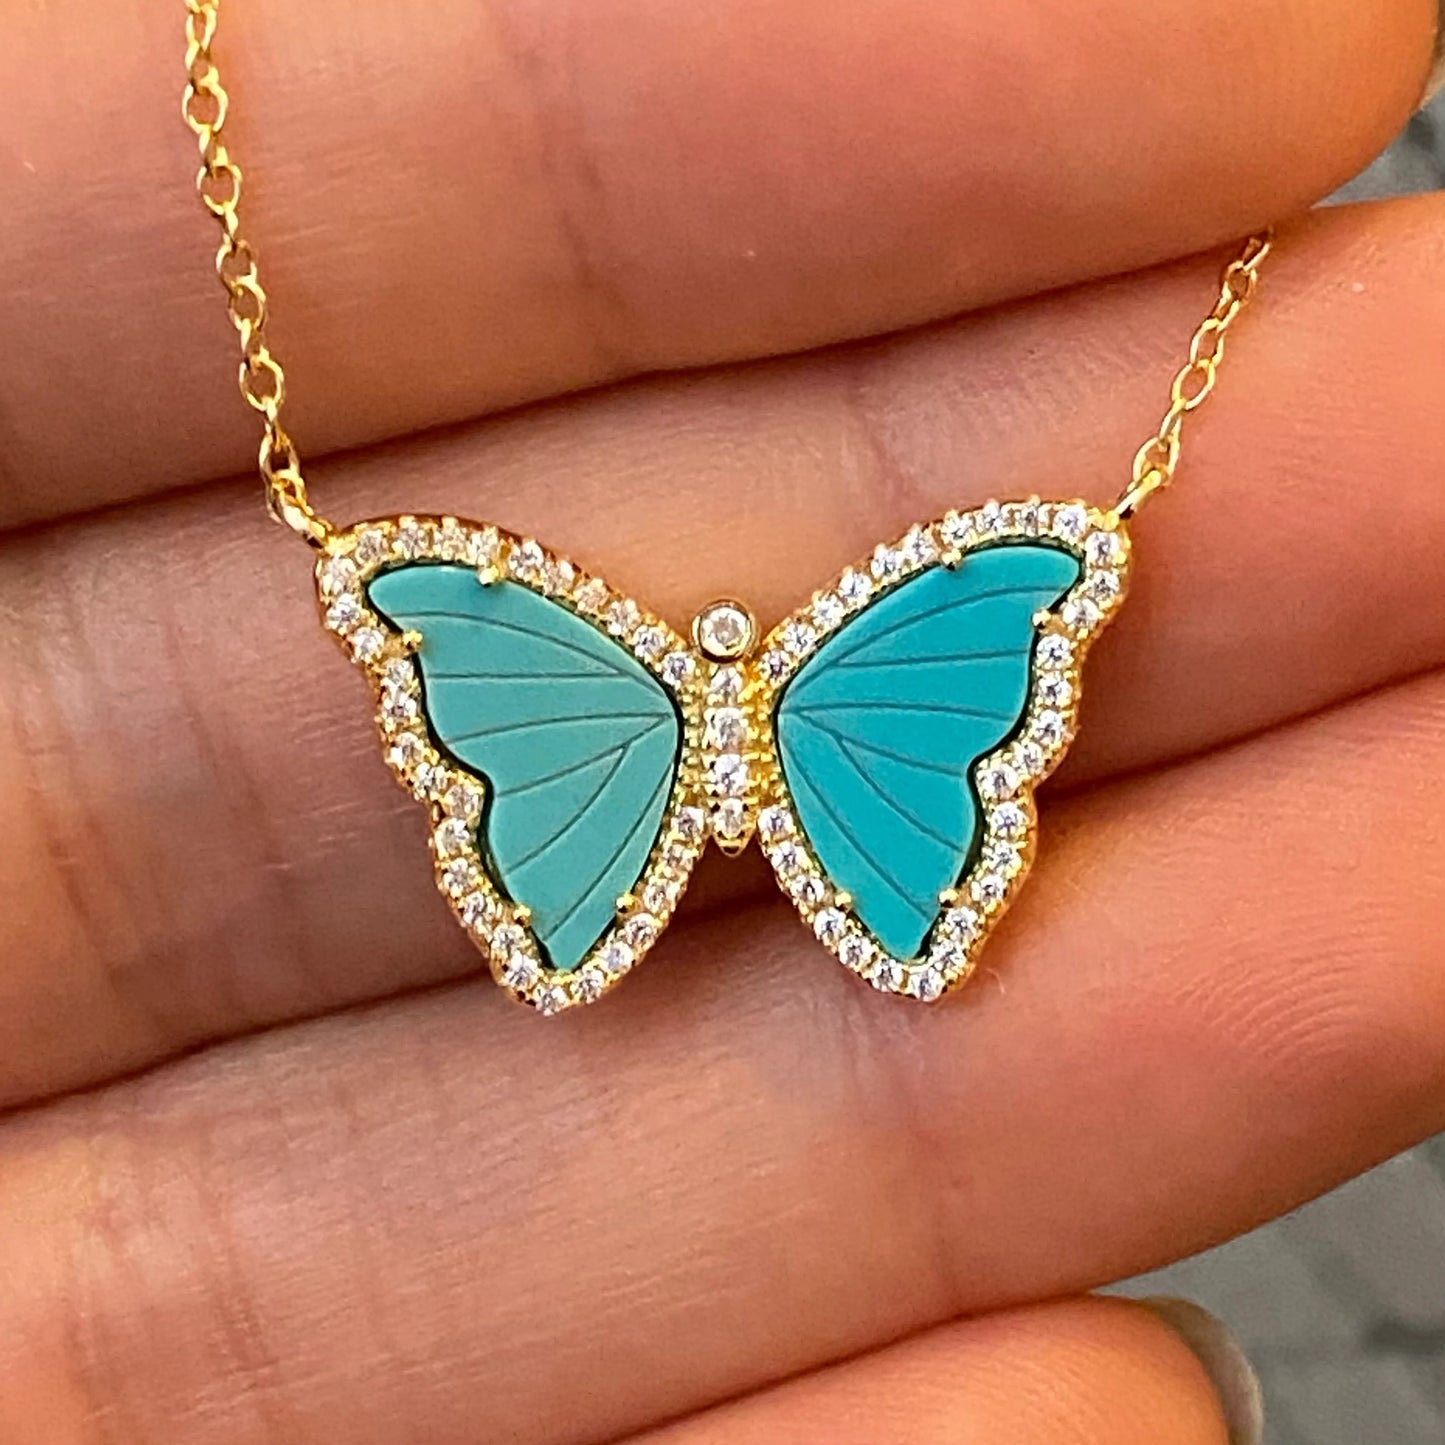 KAMARIA TURQUOISE BUTTERFLY NECKLACE WITH CRYSTALS